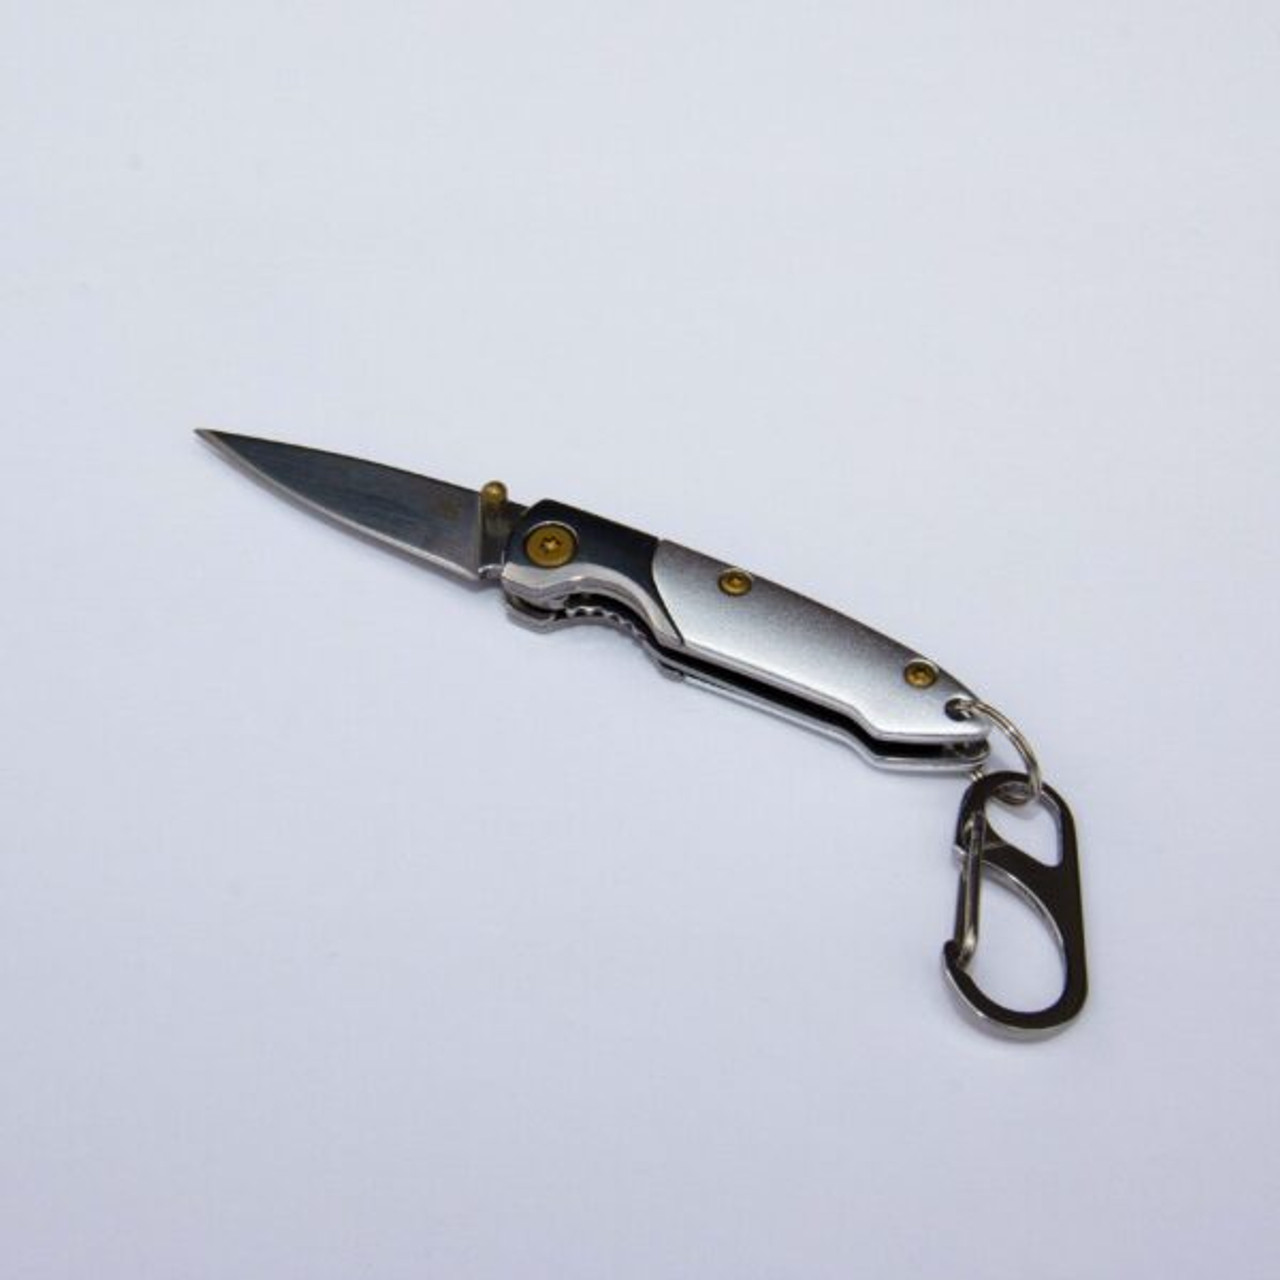 product image for Brighten Blades White Album BB 140 Keychain Knife